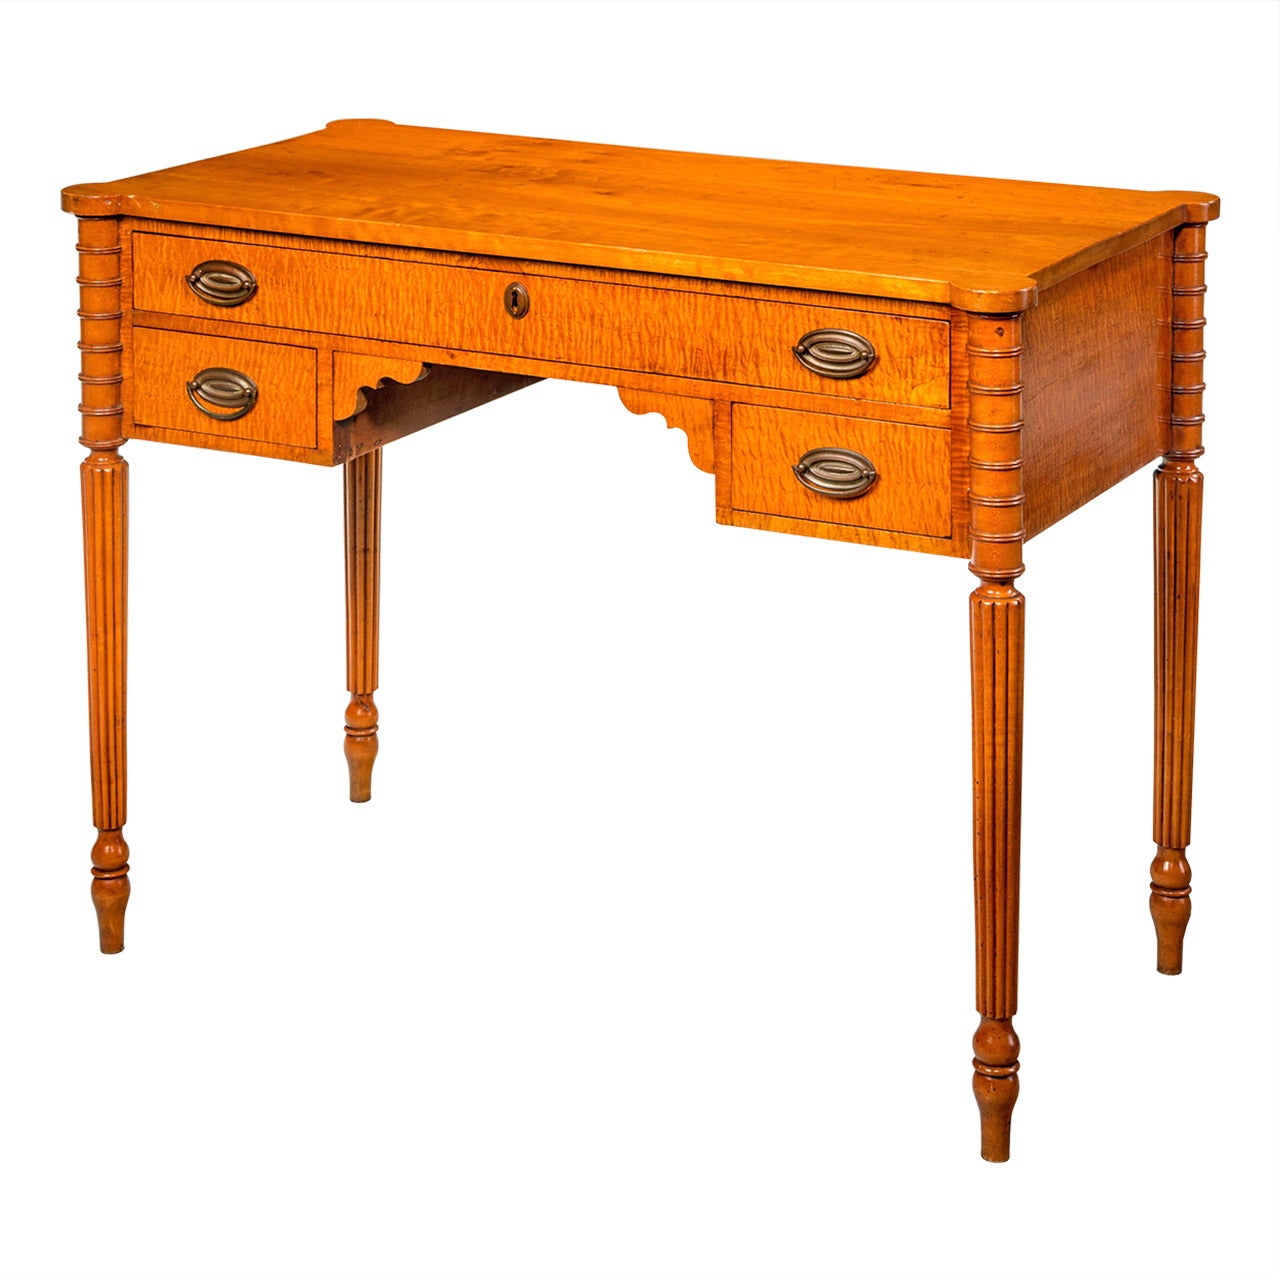 Late 19th Century Satin Birch Side Table